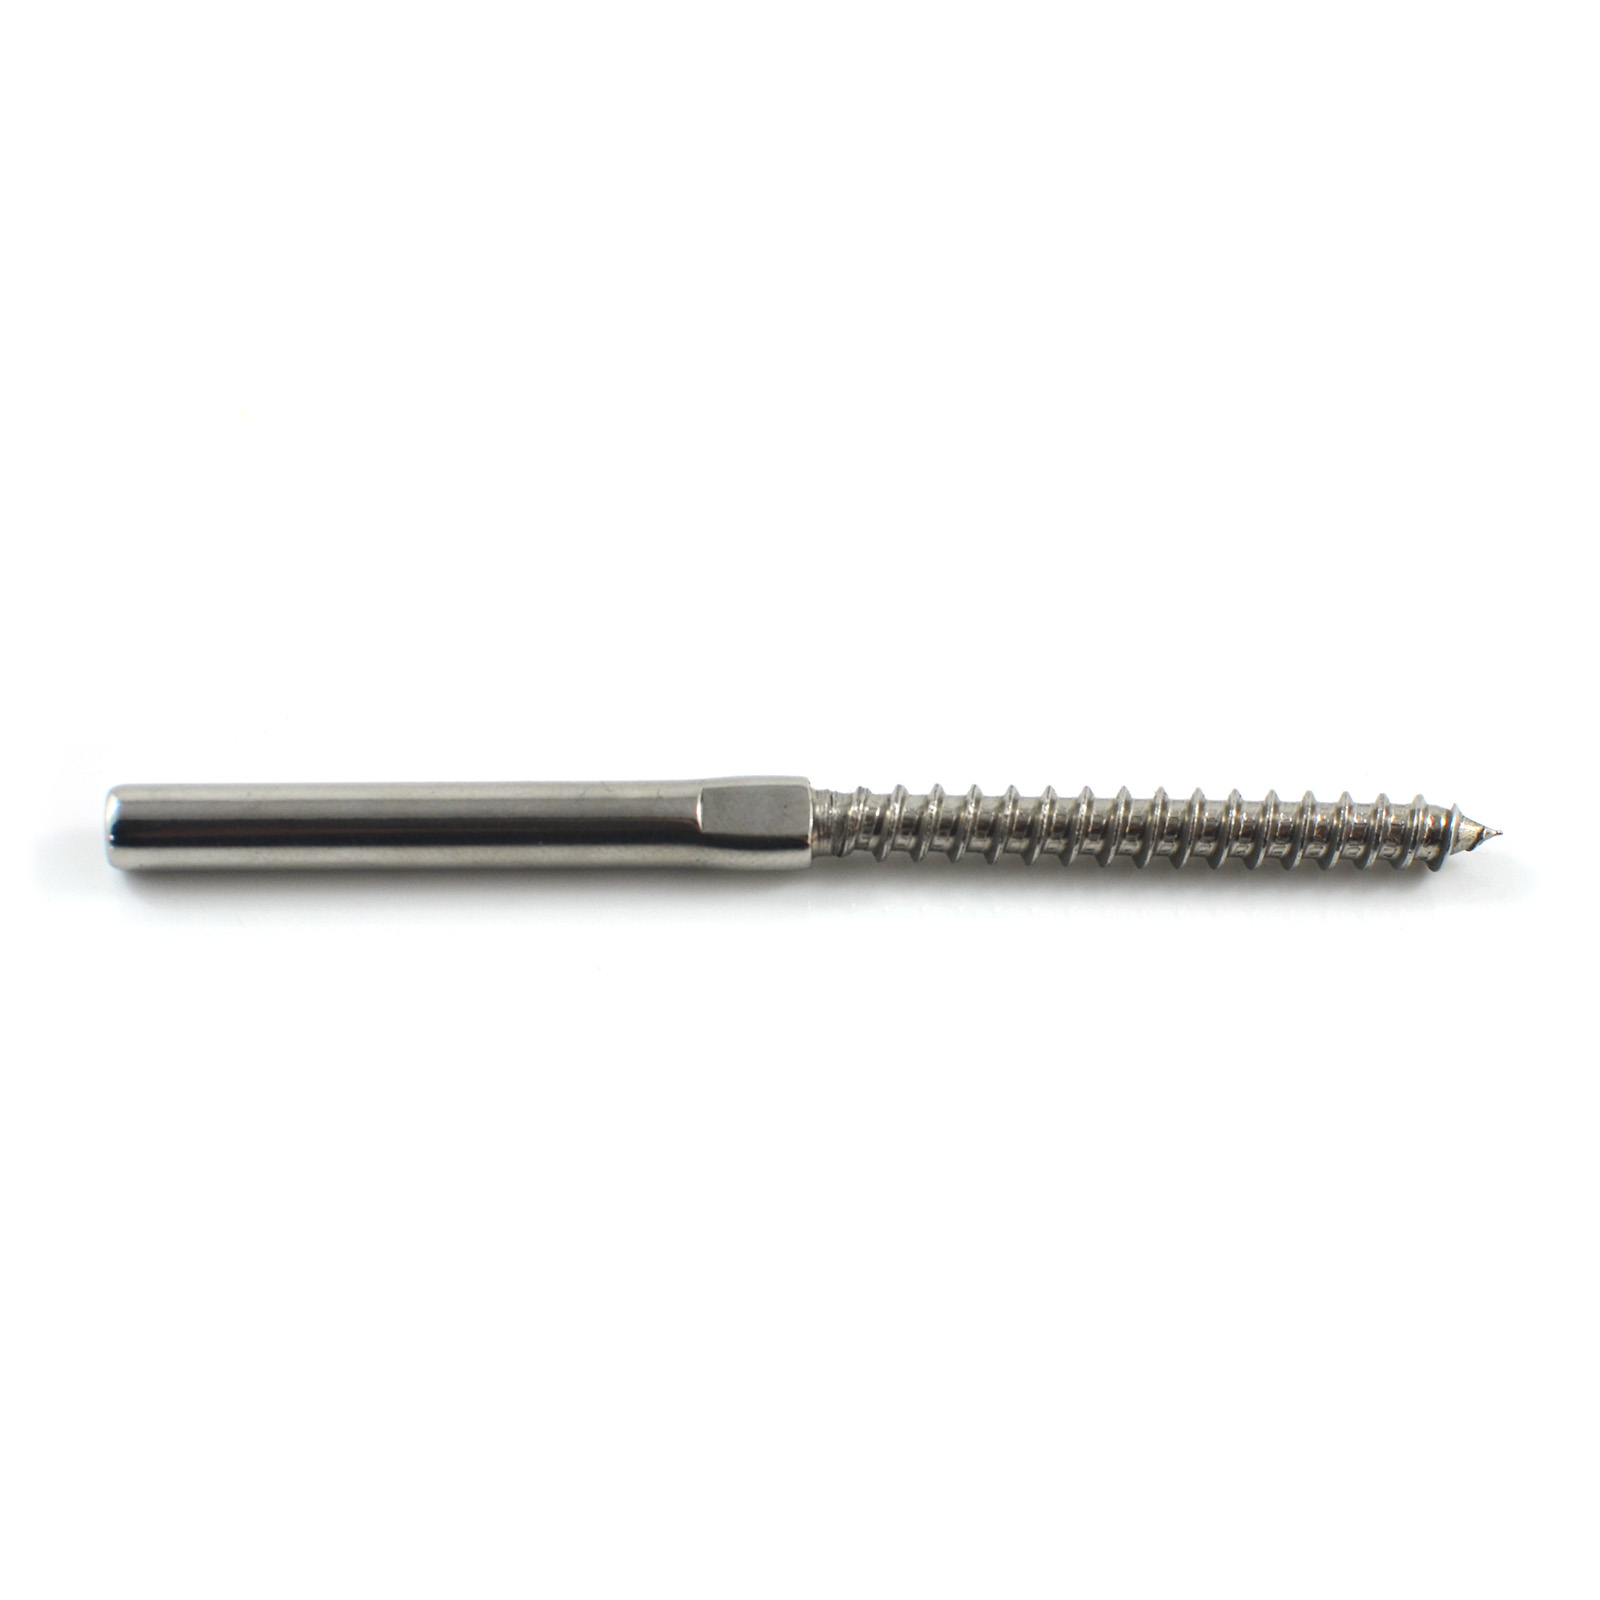 Lag Screw Terminal M6 x 48mm LHT for 3.2mm Wire AISI 316